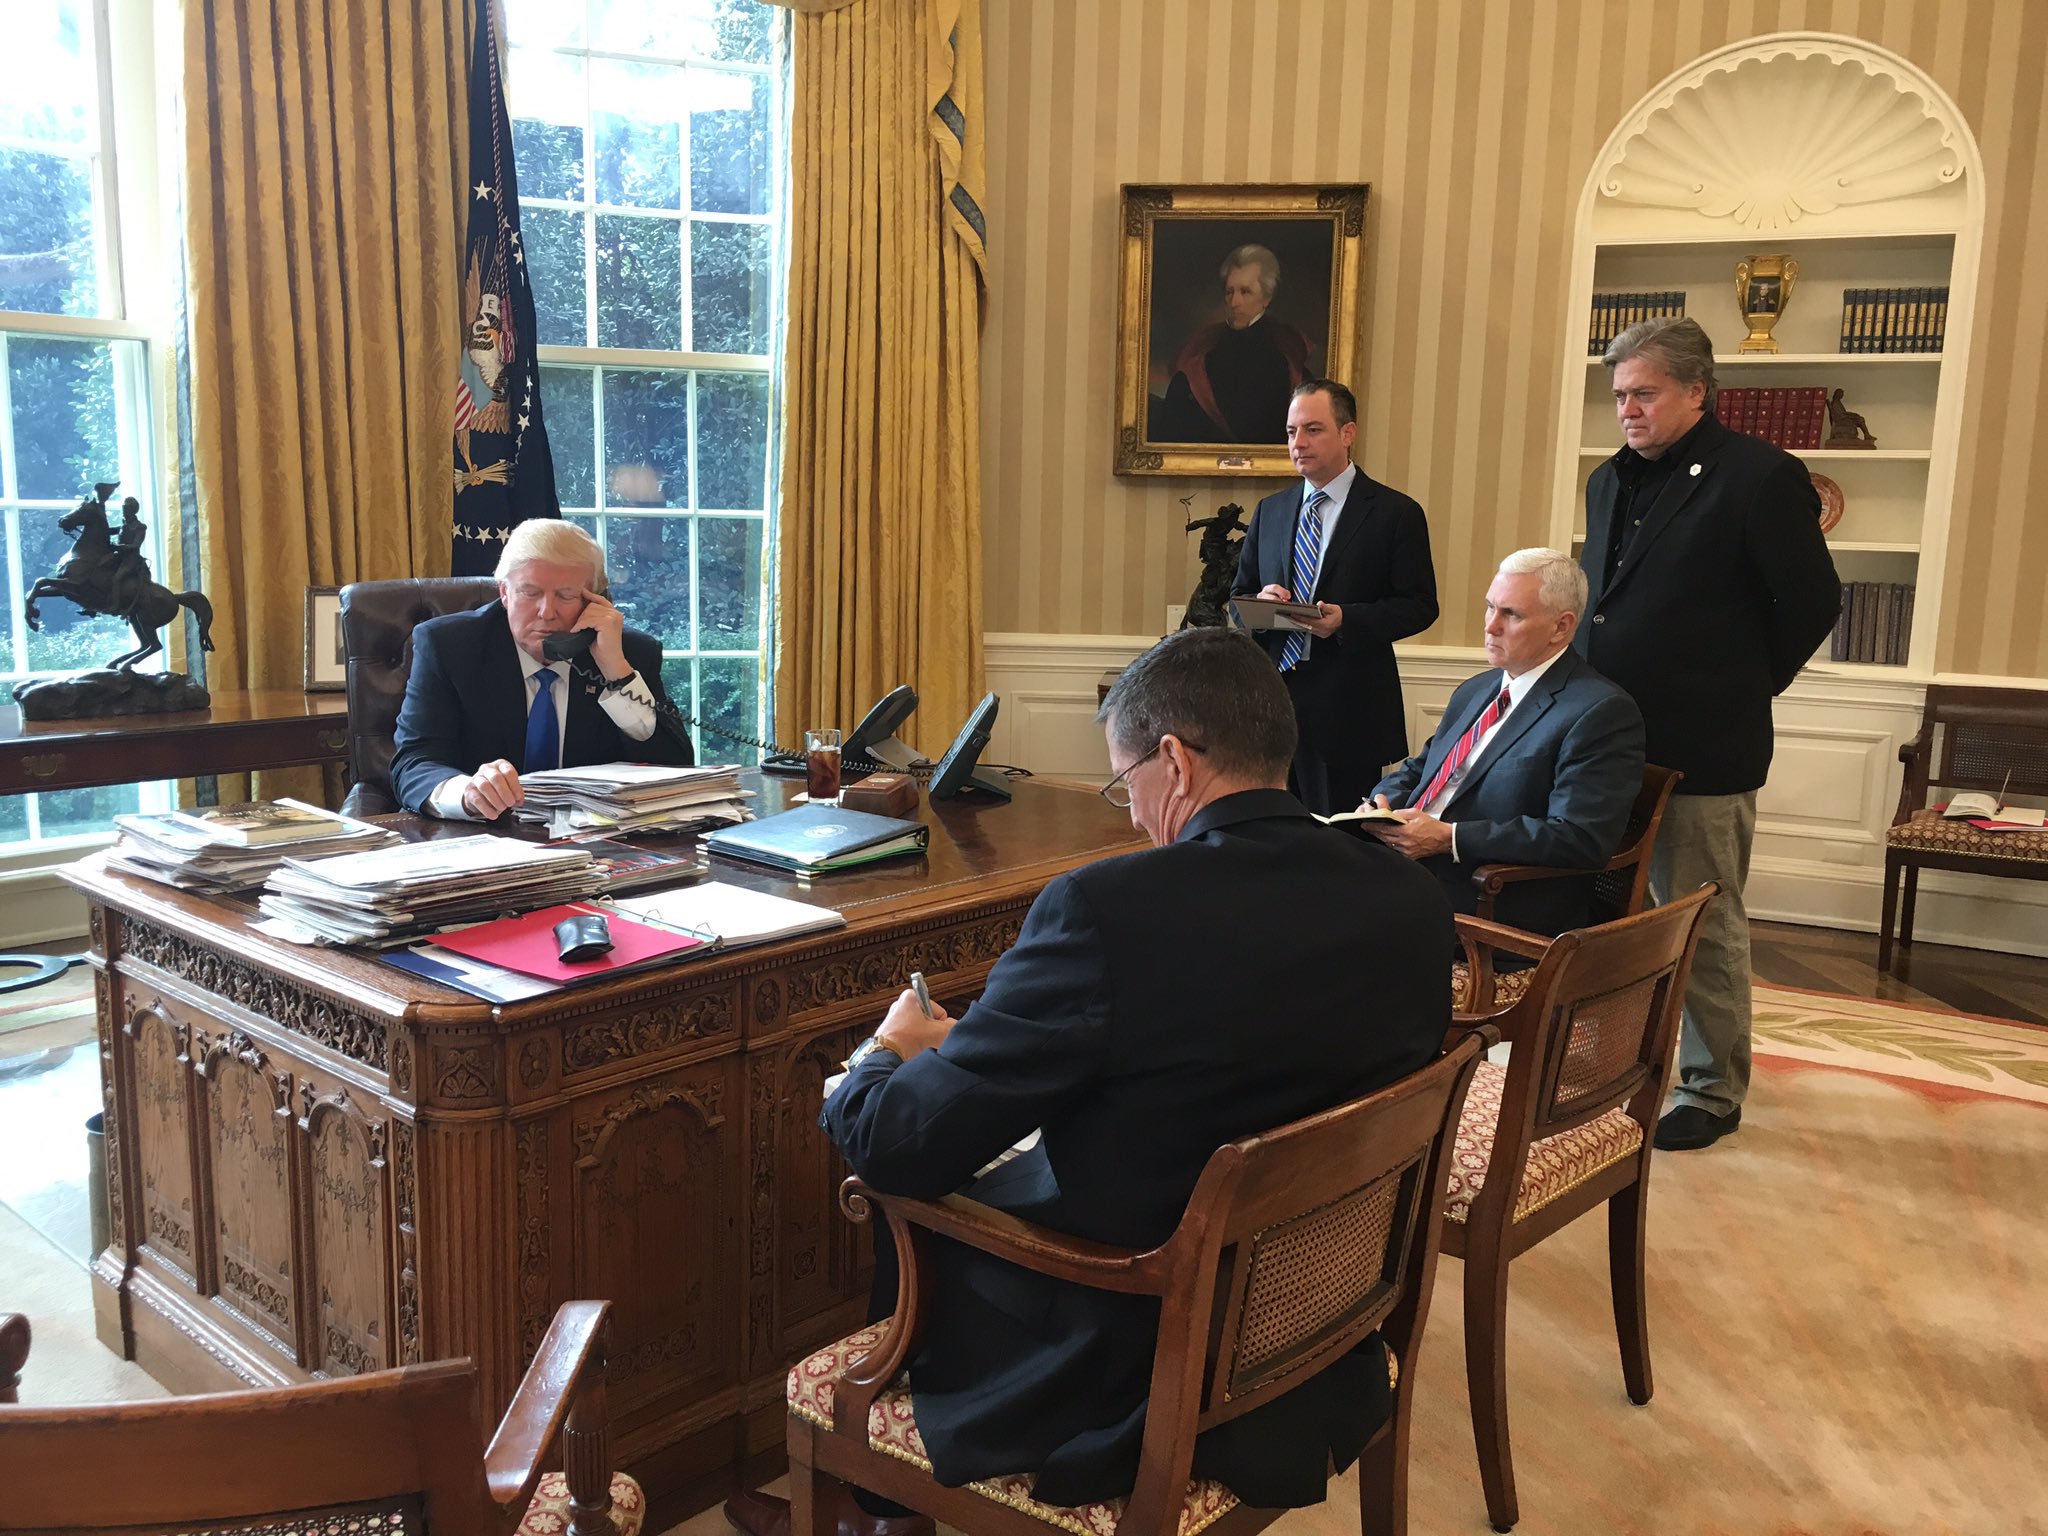 Trump speaking with Putin in oval office